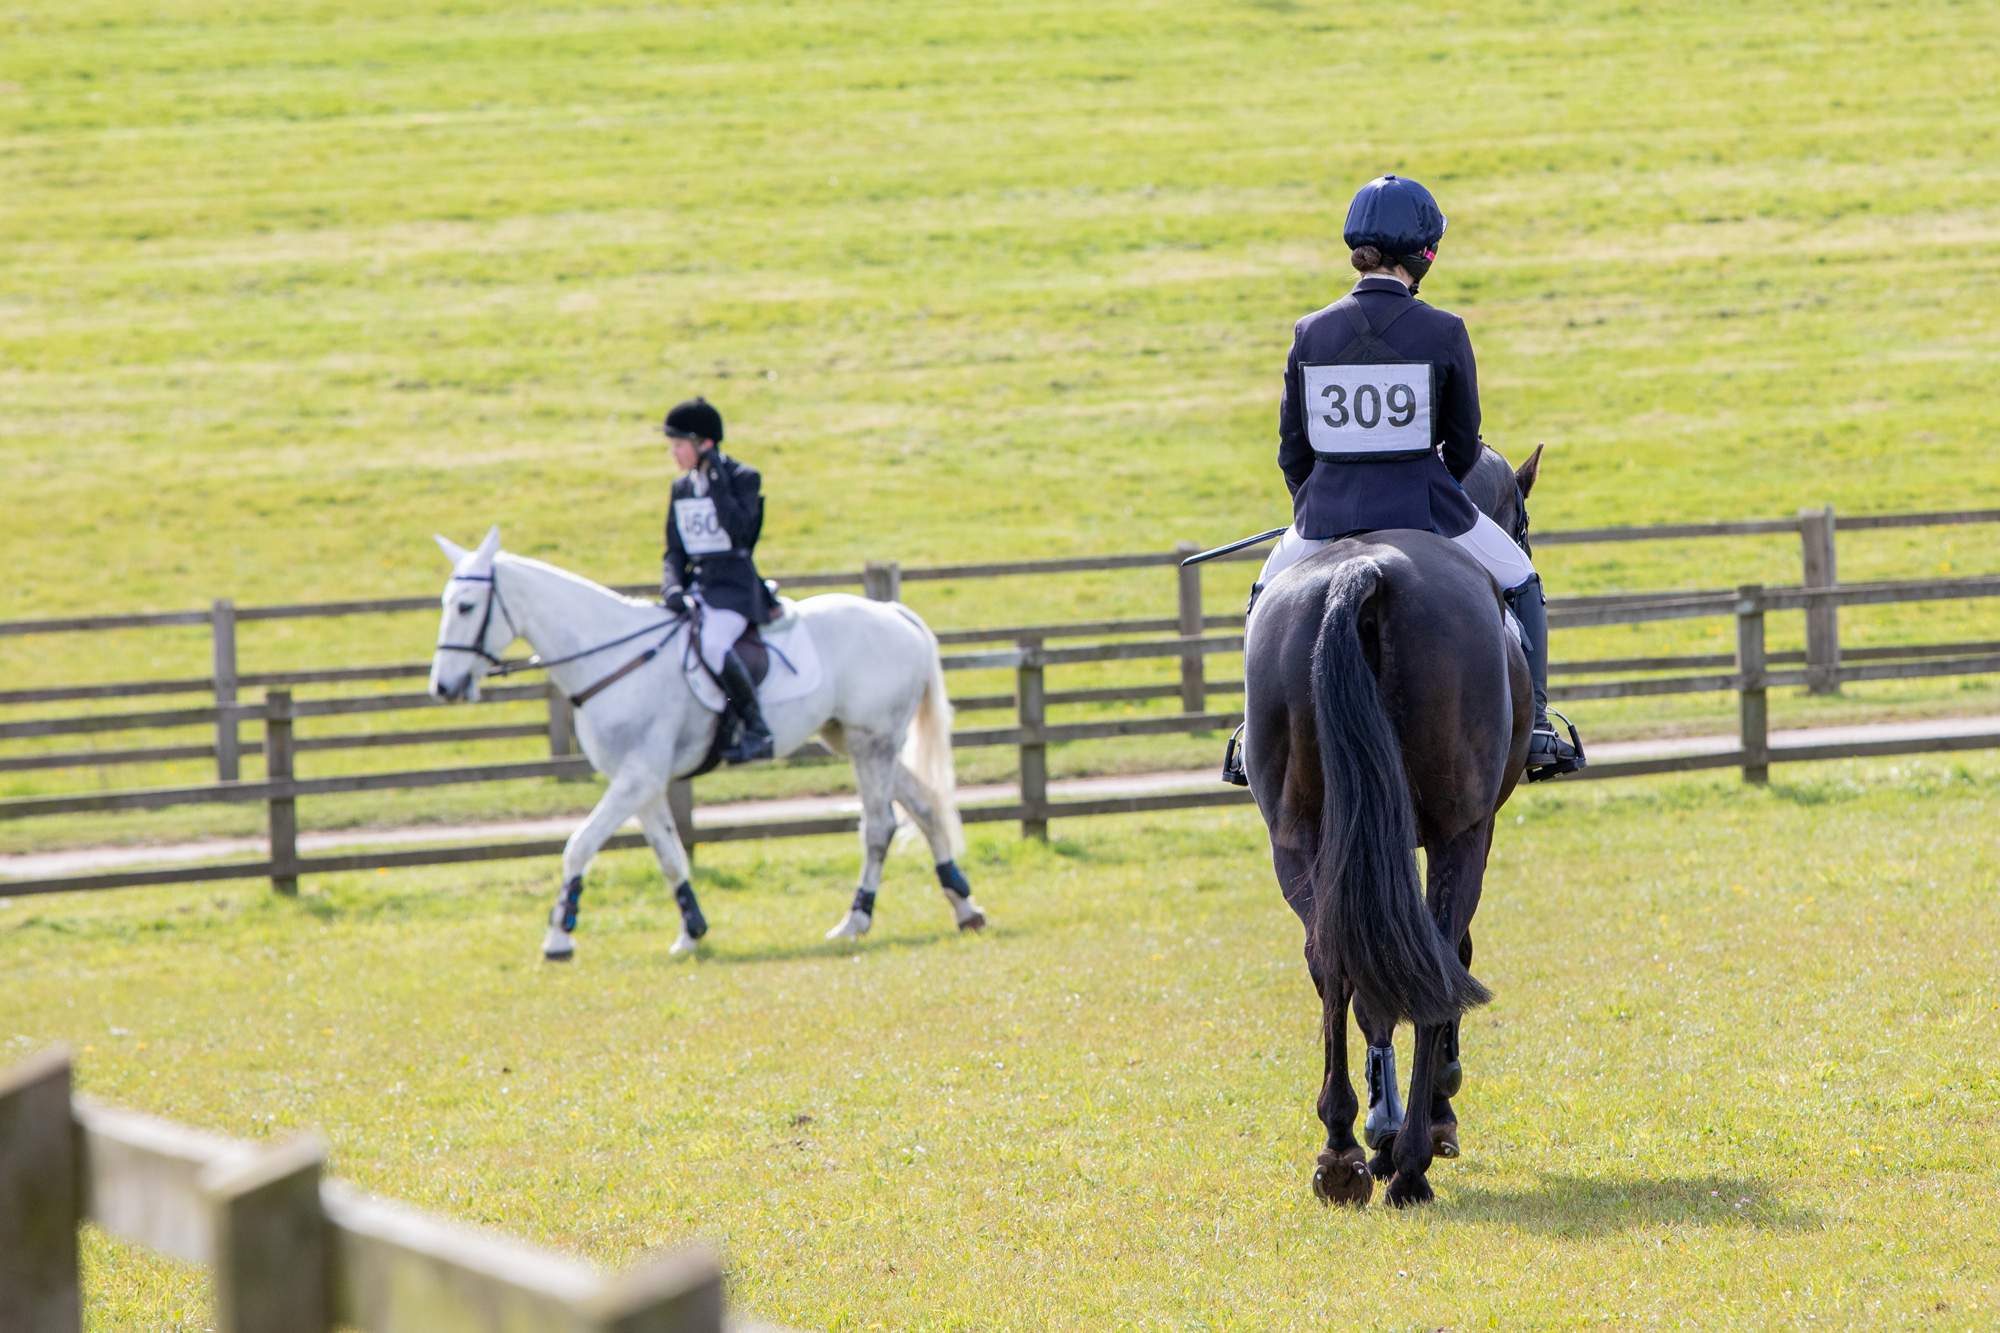 Equestrian sport should be brave and proactive on welfare to maintain public acceptance